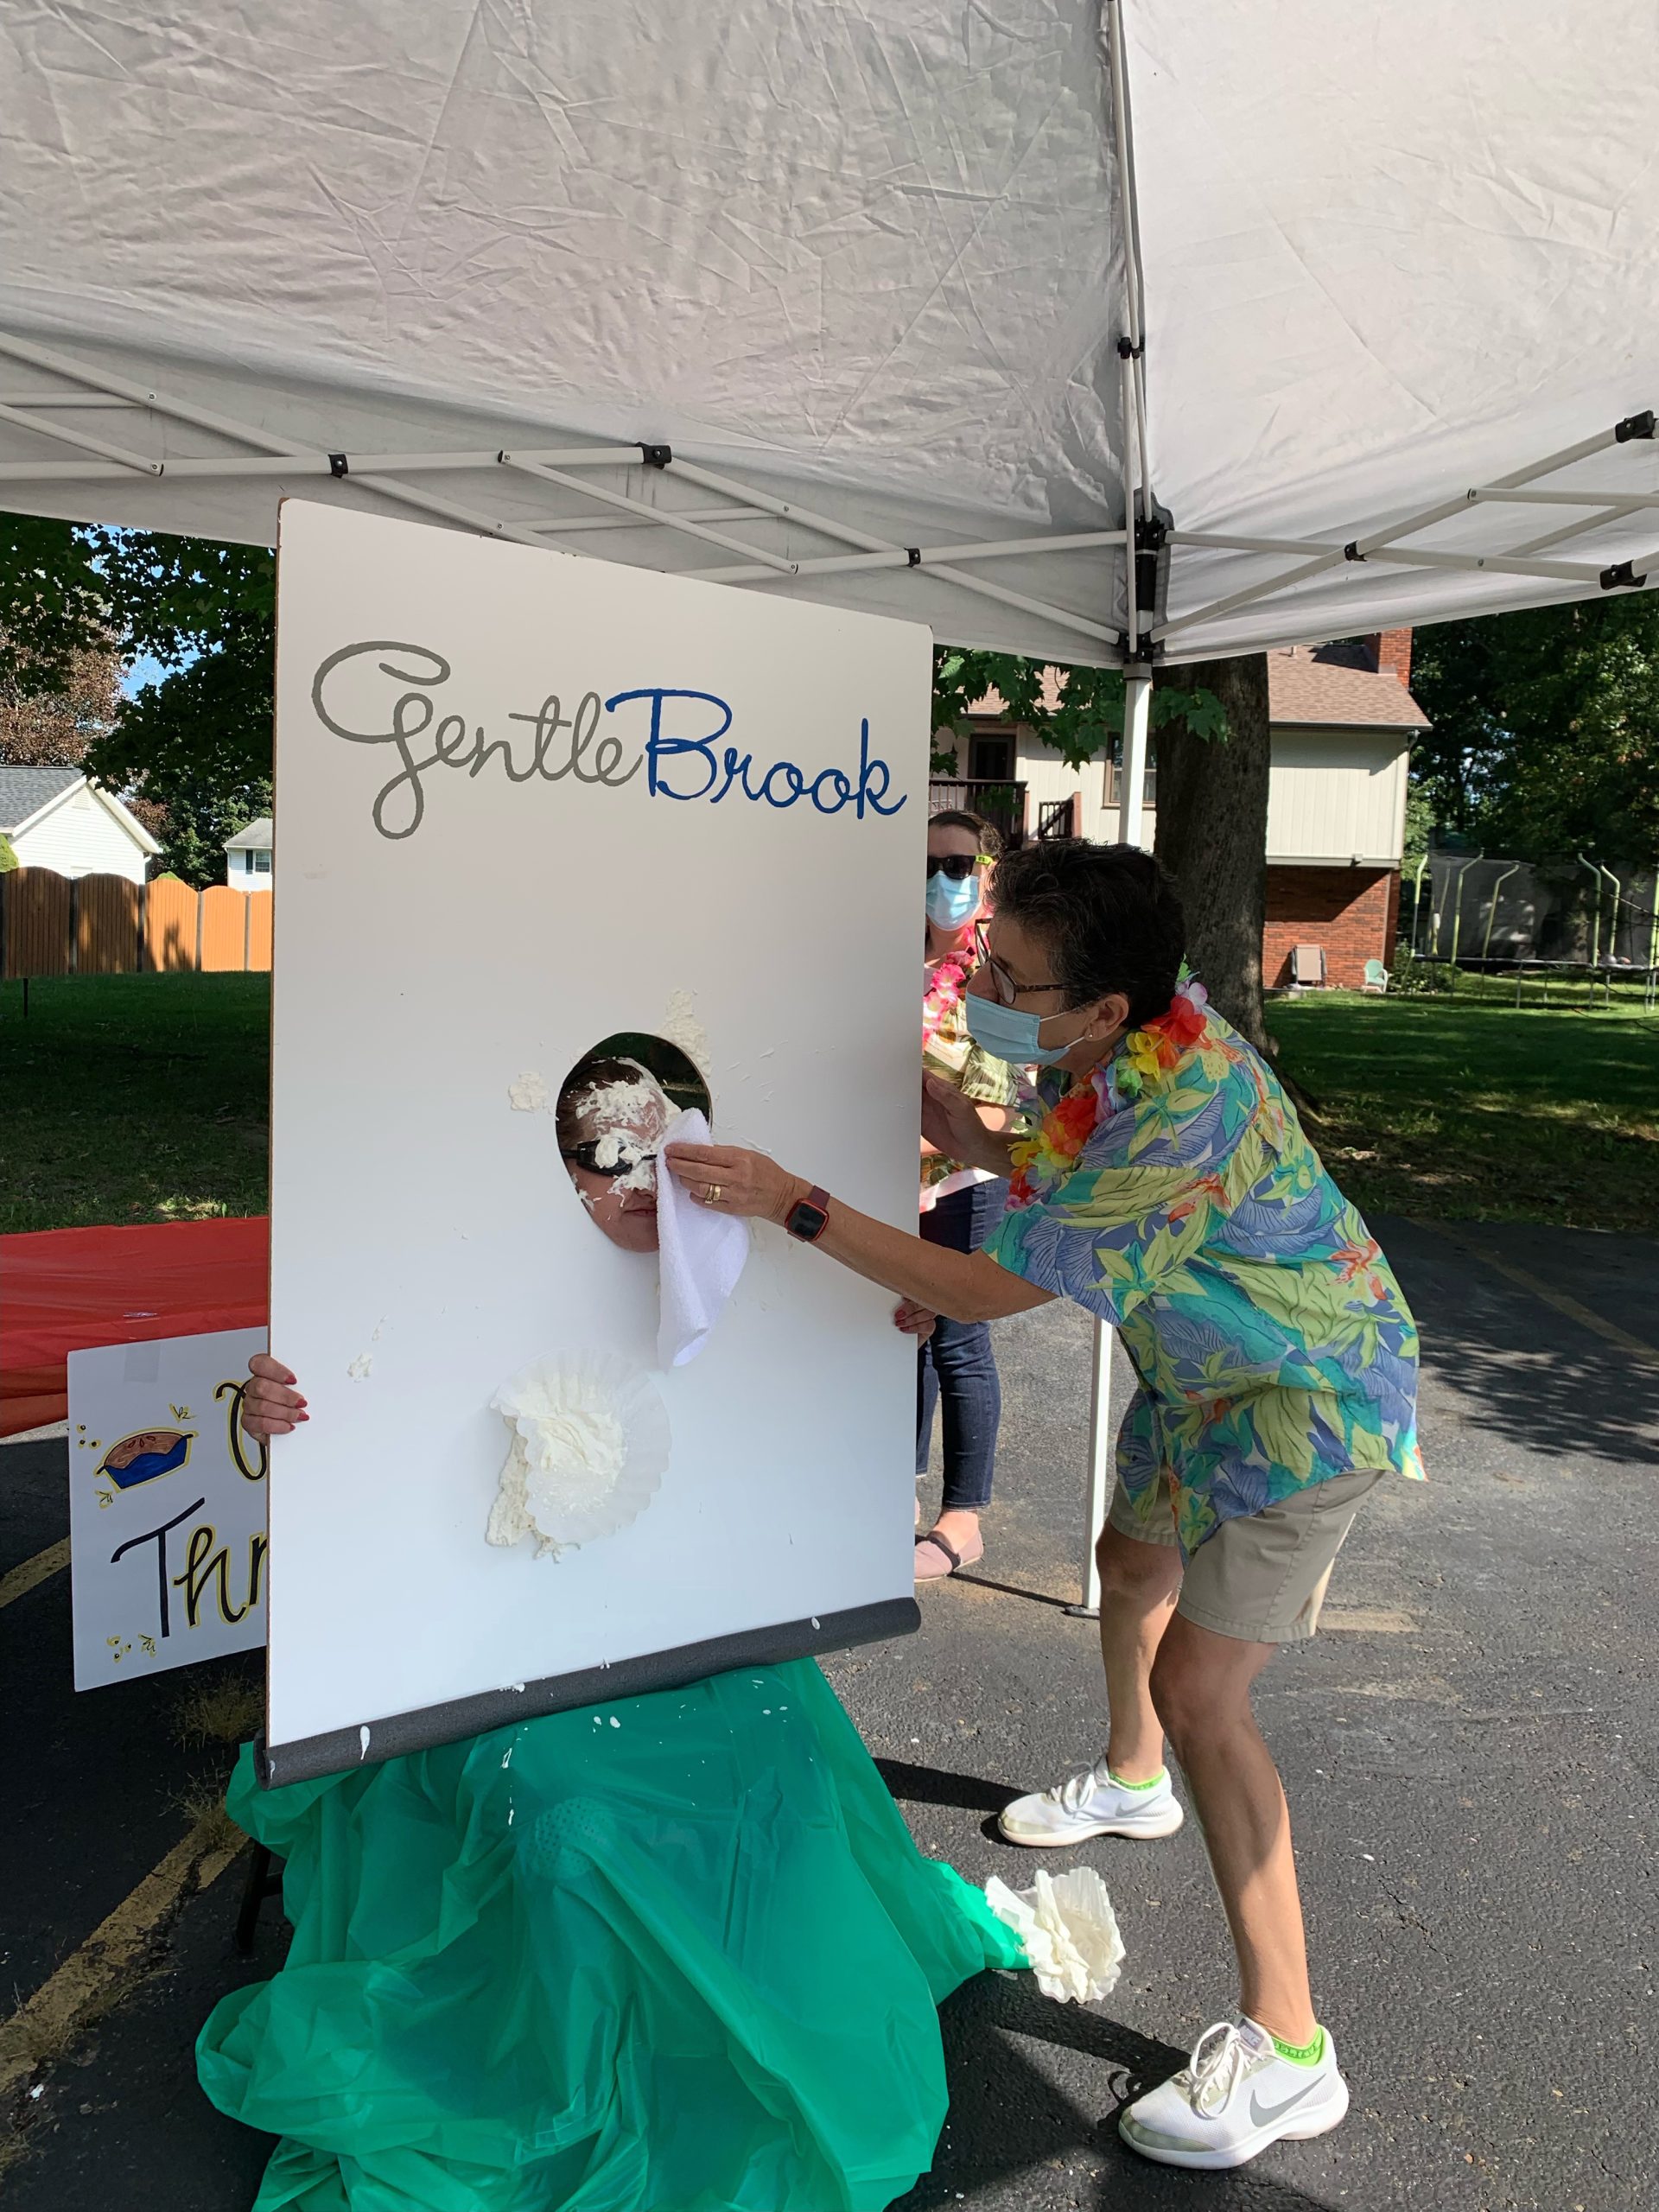 GentleBrook Summer Day Camp pie in the face